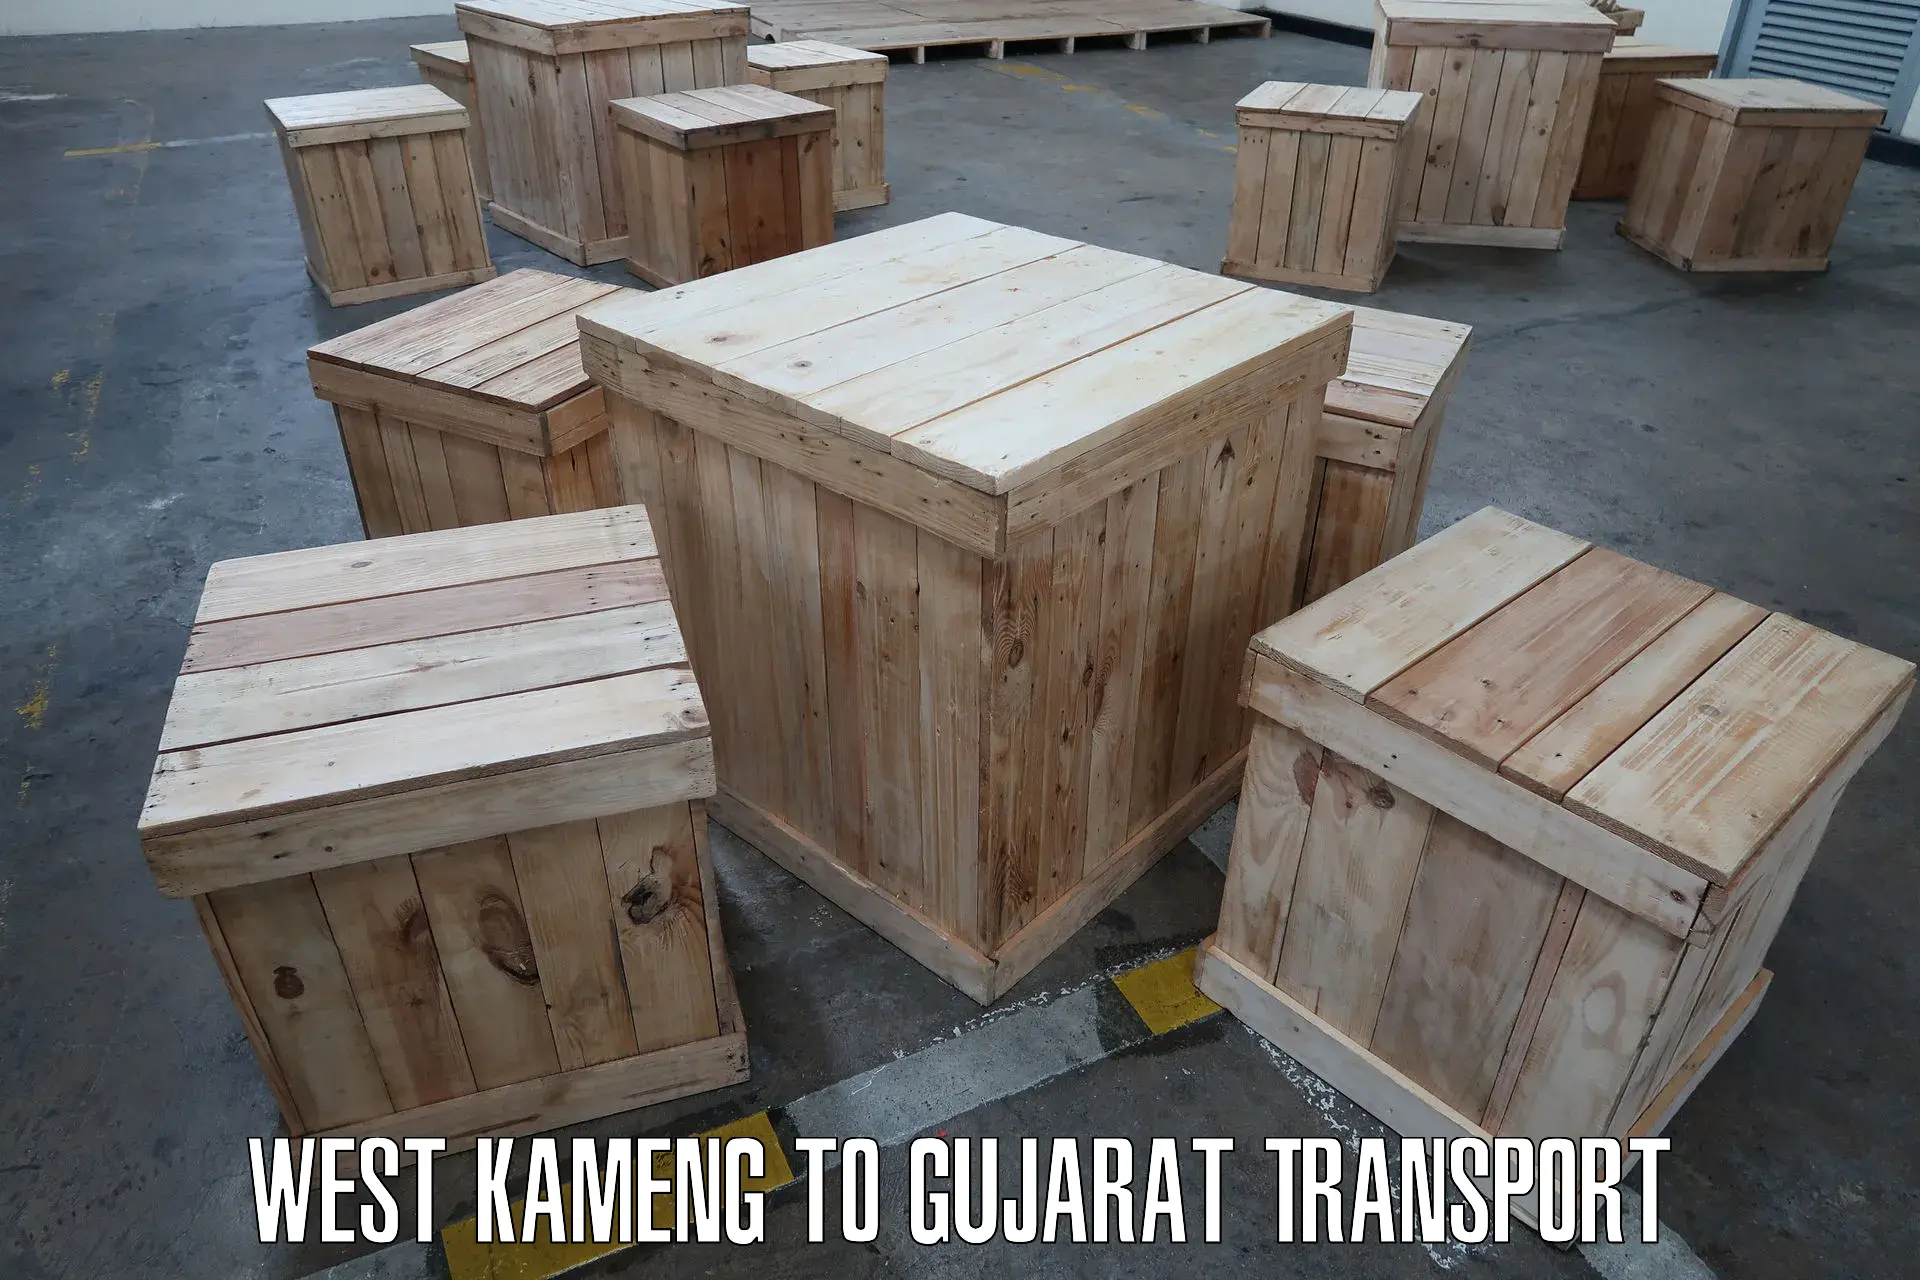 Truck transport companies in India West Kameng to Dholka